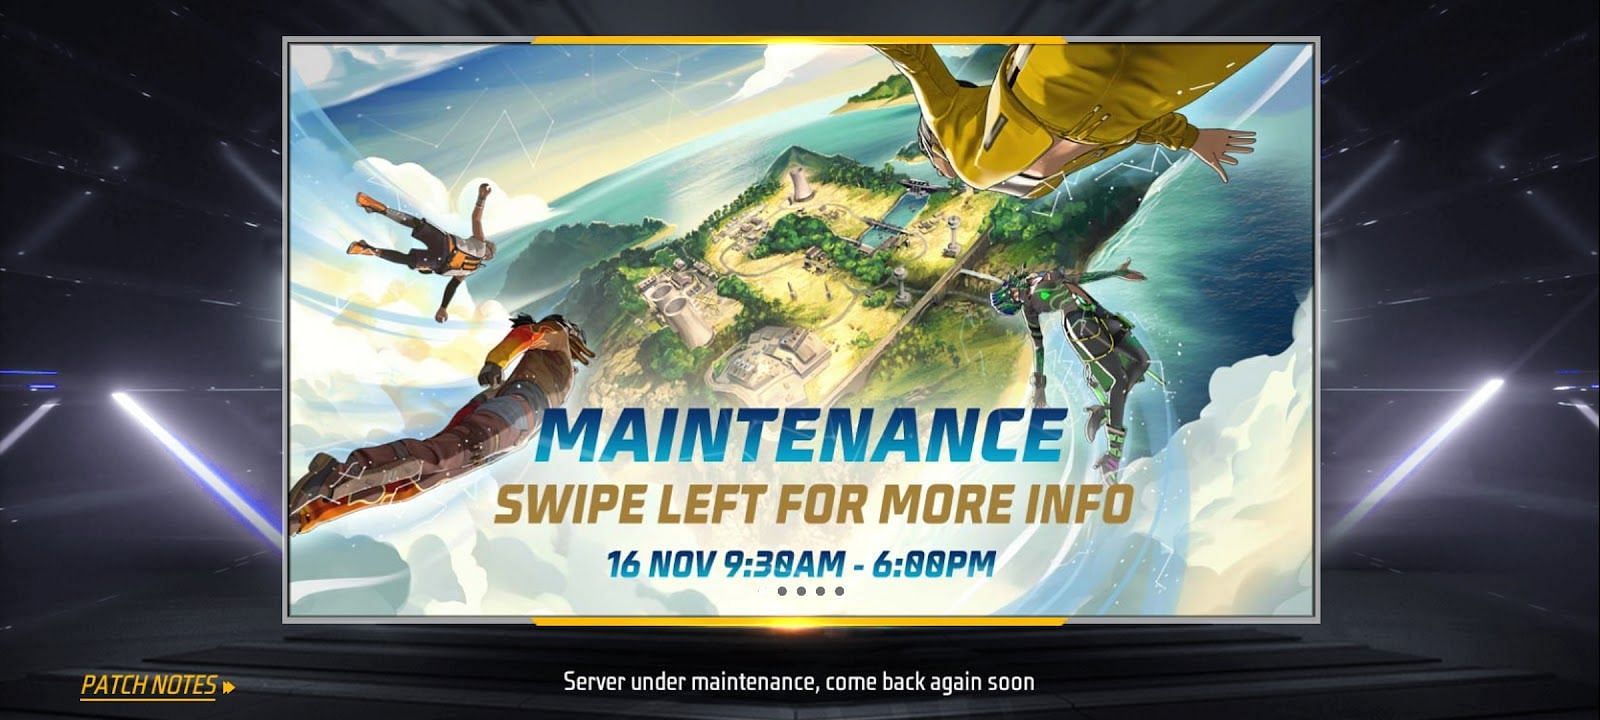 Maintenance break will remain active from 9:30 am to 6:00 pm (Image via Garena)